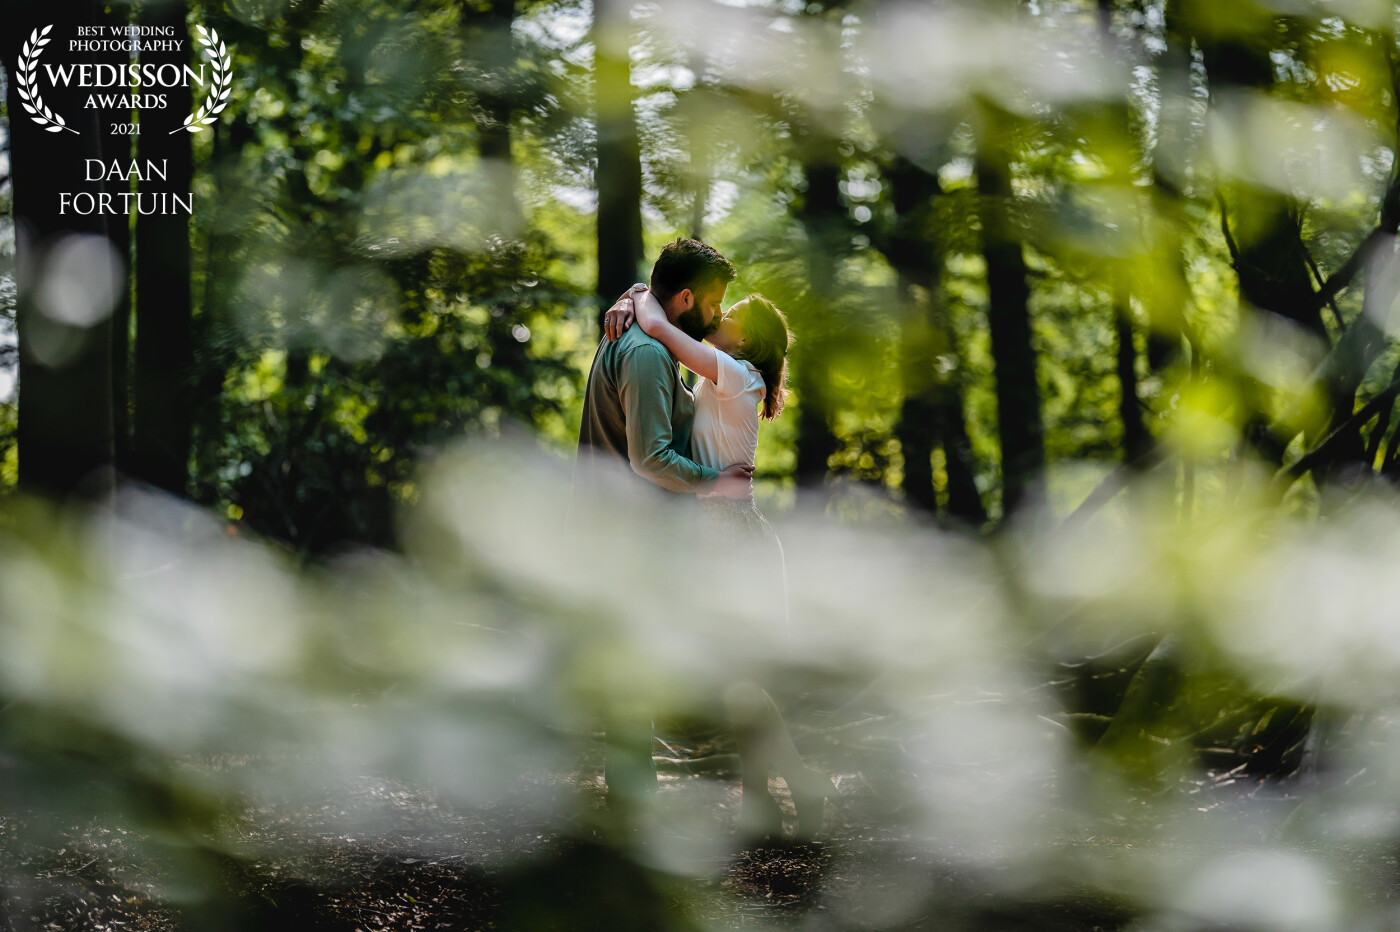 For this pre wedding shoot we started out in the woods.The light was amazing.Love to play around with some front or background blur...